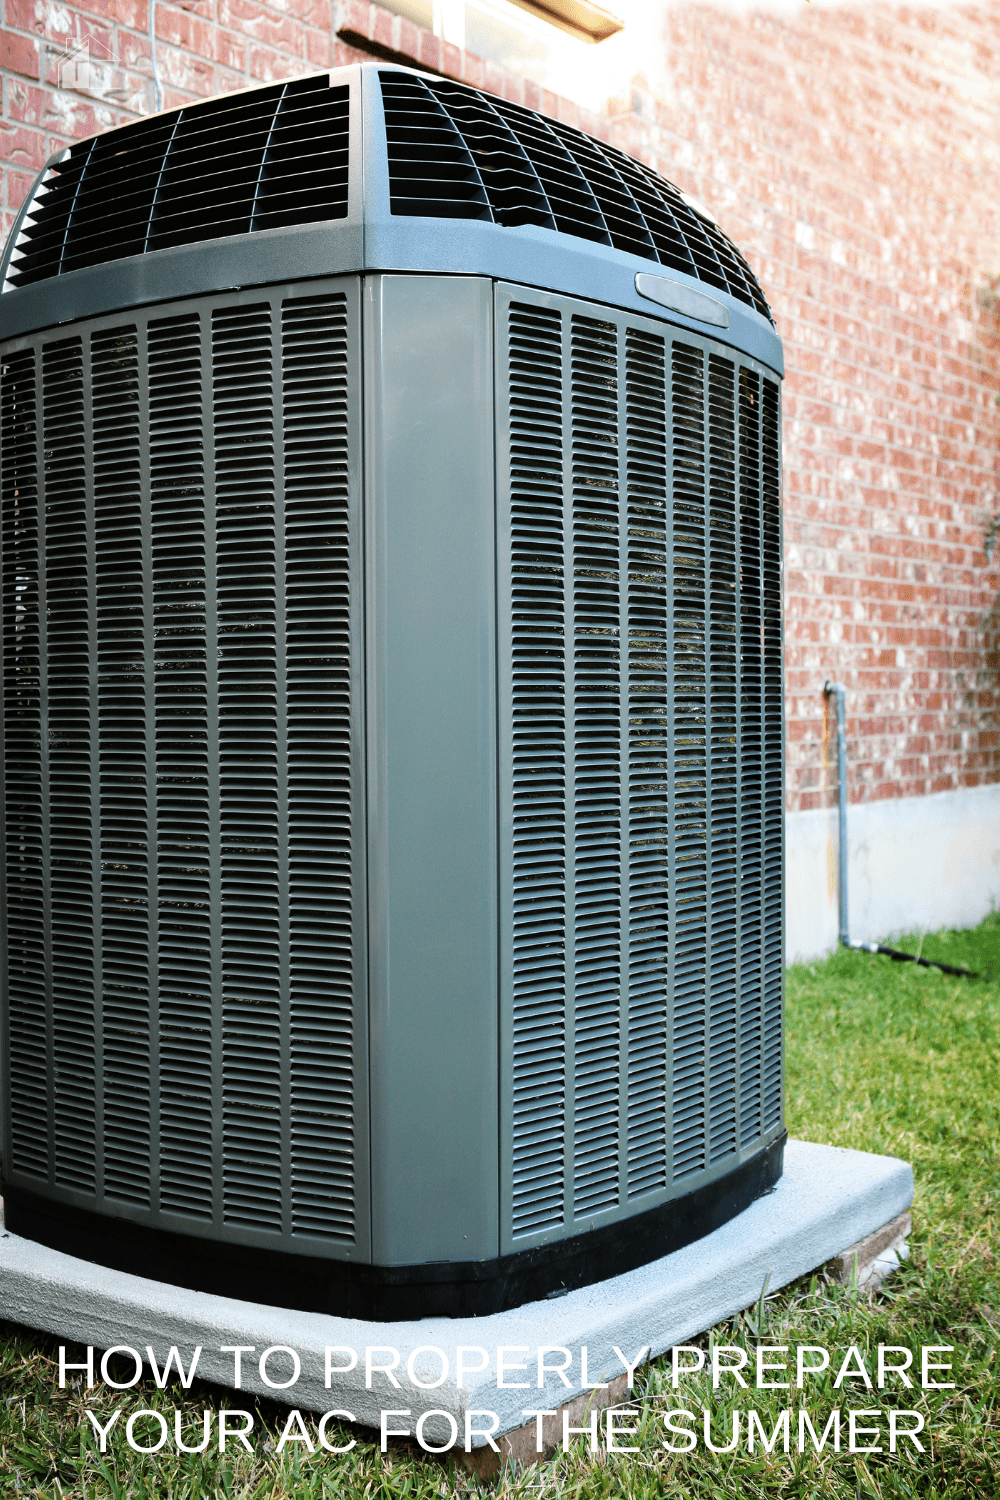 Learn the proper ways to prepare your home AC for the upcoming summer. Doing this will also help you save money in the long run. via @mystayathome